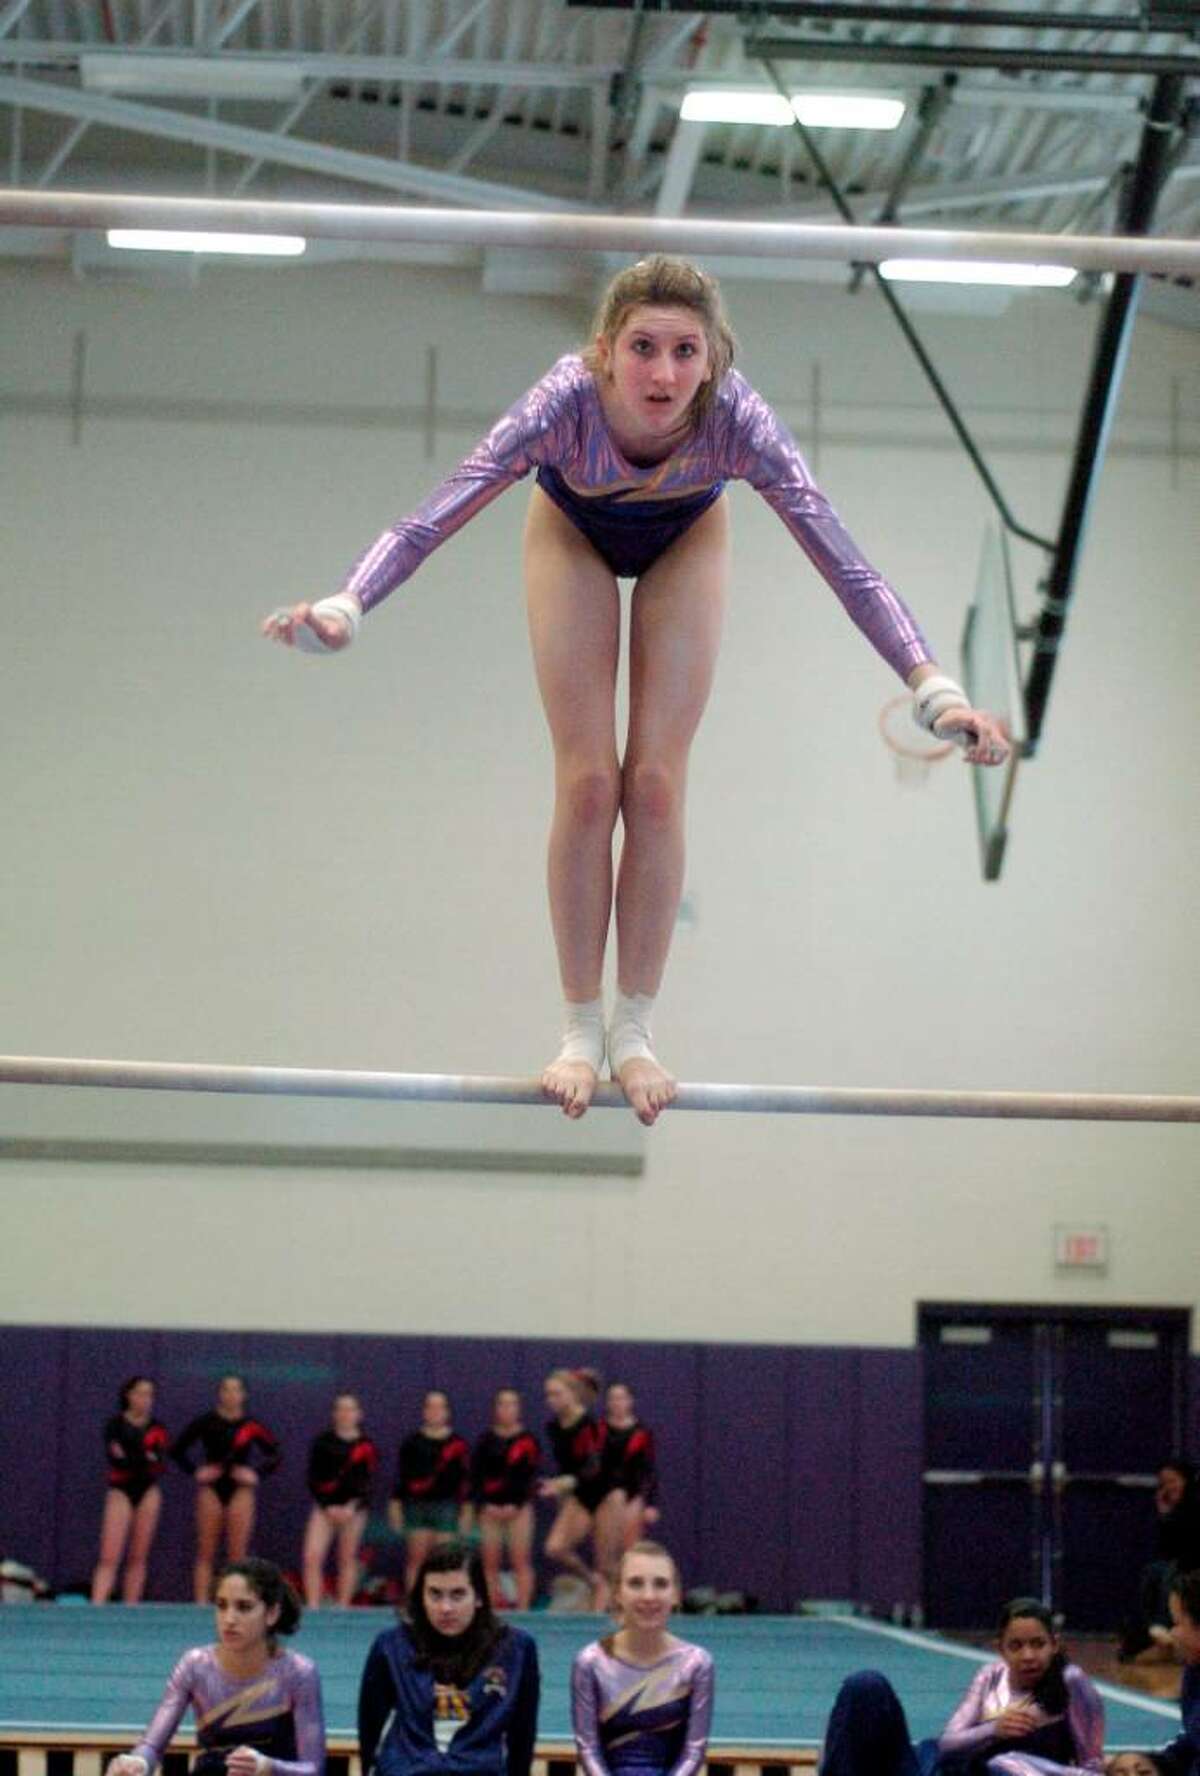 Christina Zendman from Westhill High School competes at gymnastics meet at Westhill High School in Stamford, Conn. on Monday January 18, 2010. Westhill and Pomperaug are two of the schools competing.